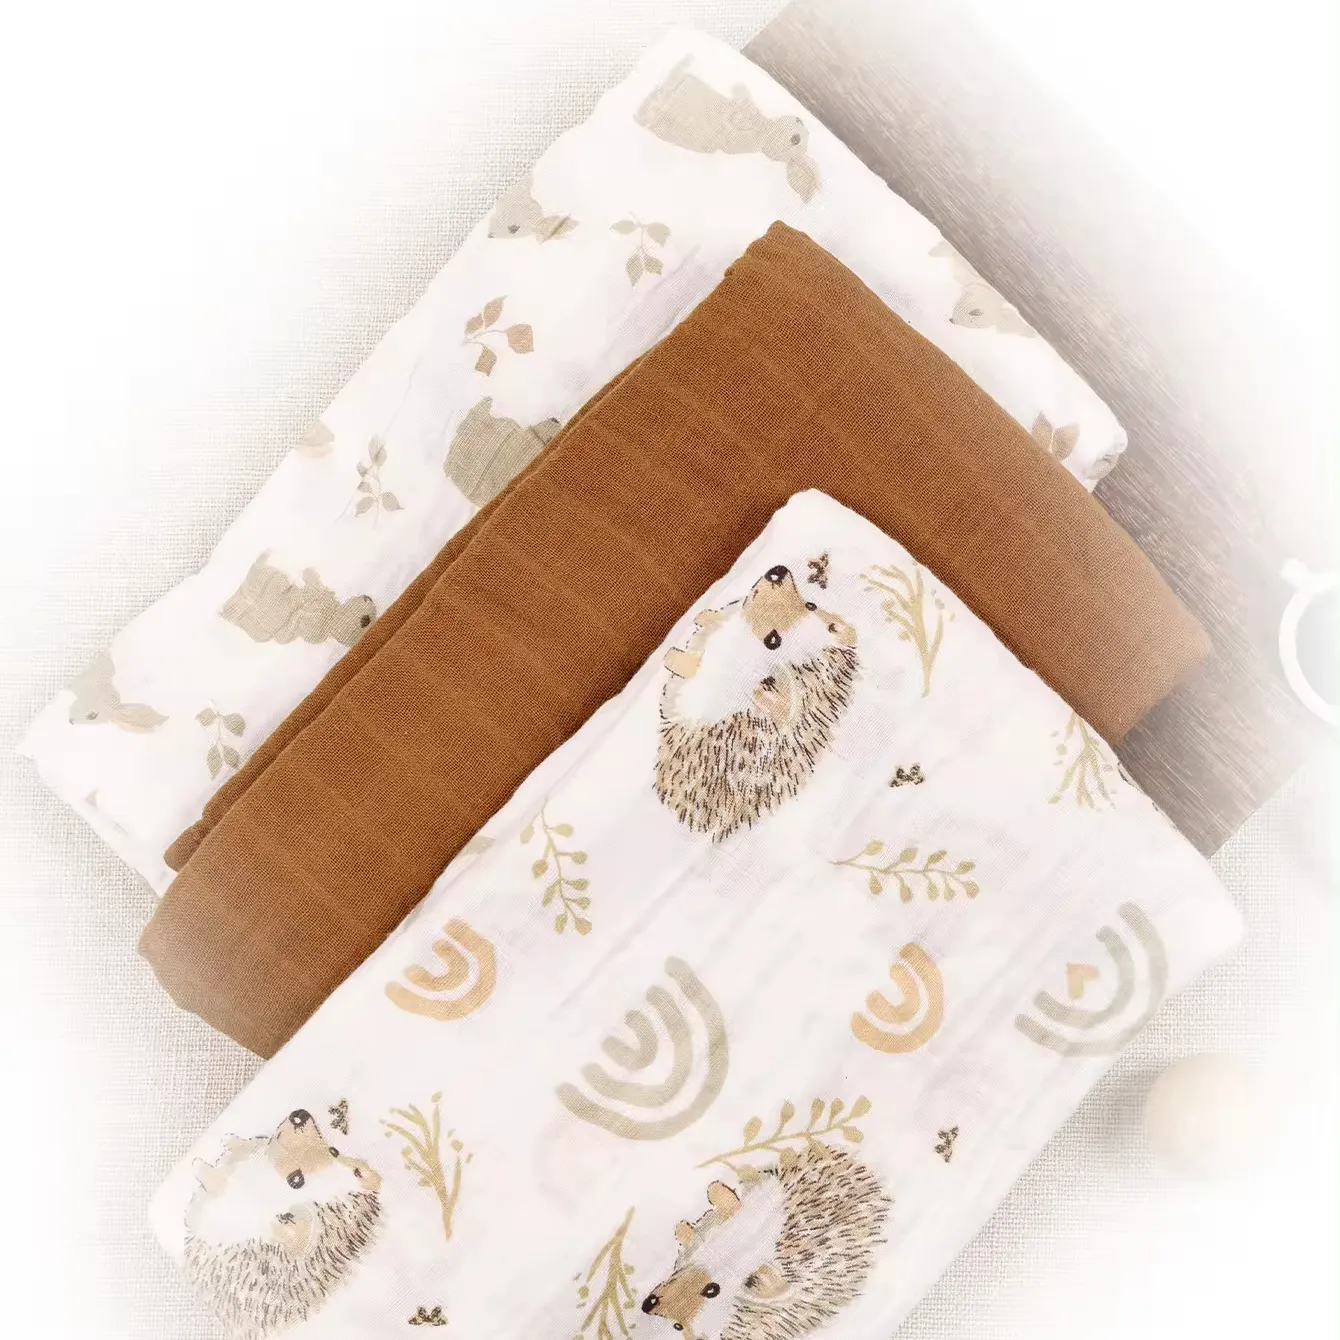 100% Bamboo Weave Organic Muslin Swaddle Waddle Baby Blankets For Newborns Breathable Skin-Friendly Swaddle Blankets